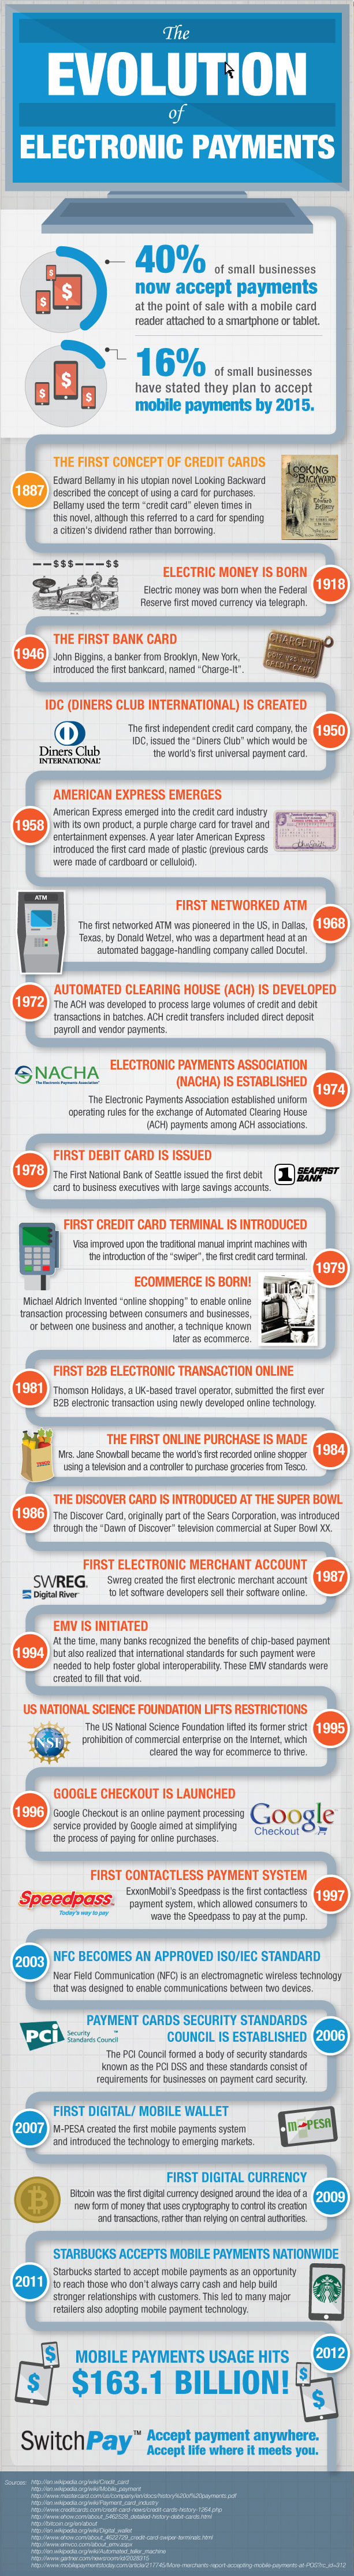 The Evolution of Electronic Payments